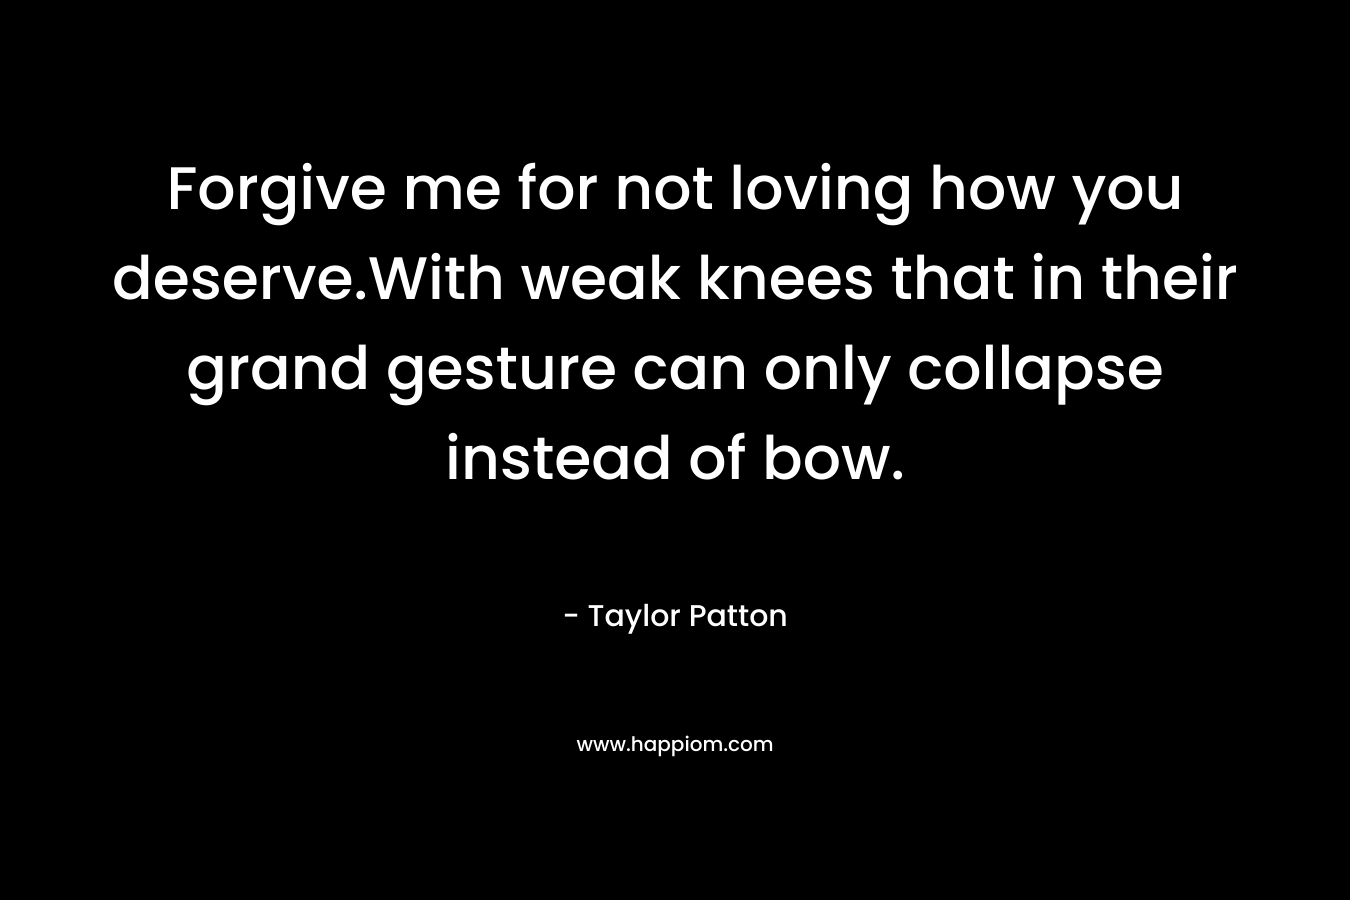 Forgive me for not loving how you deserve.With weak knees that in their grand gesture can only collapse instead of bow. – Taylor Patton